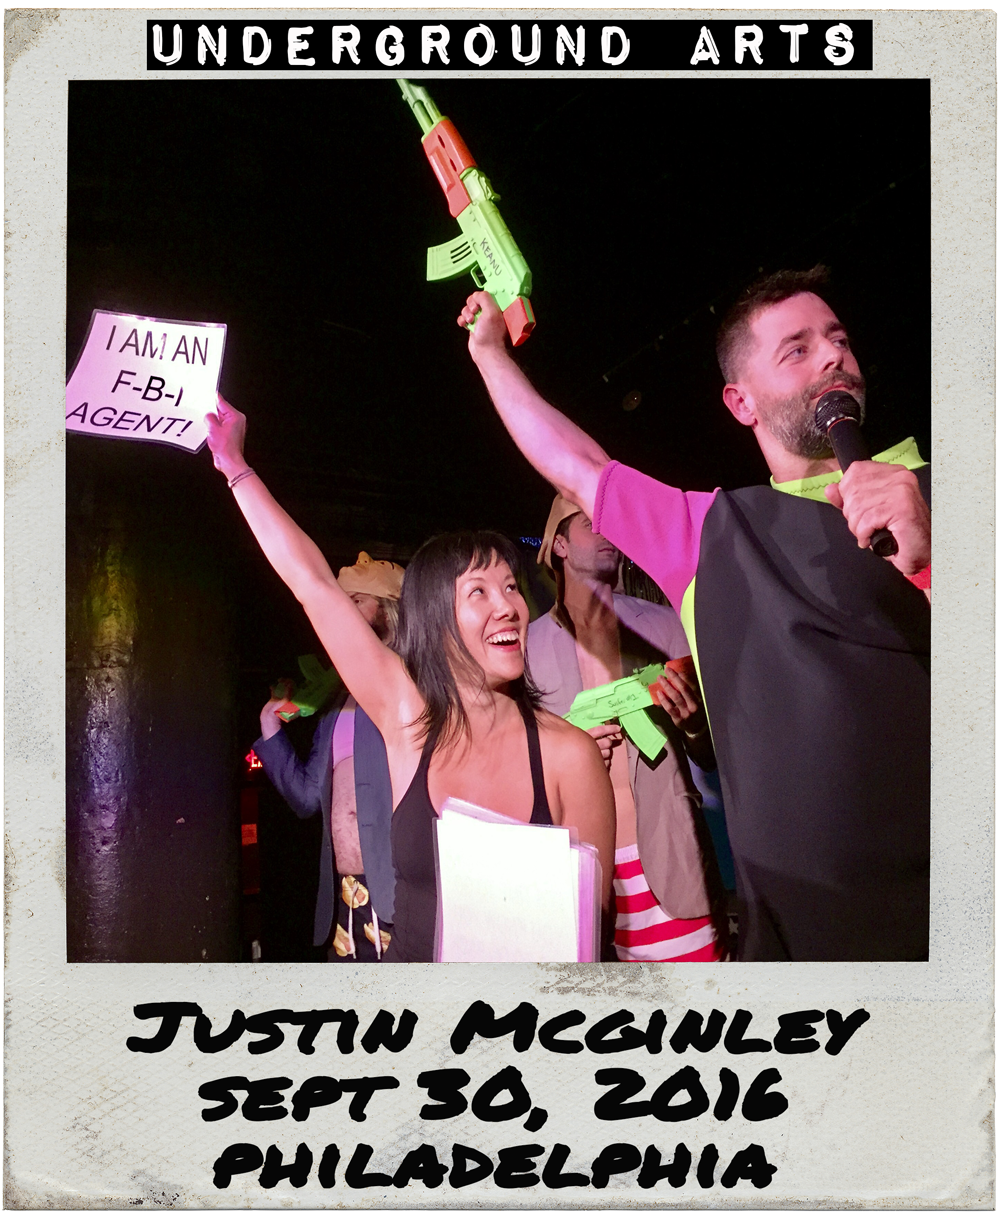 09_30_16_Justin-McGinley_Underground-Arts_Philly.png